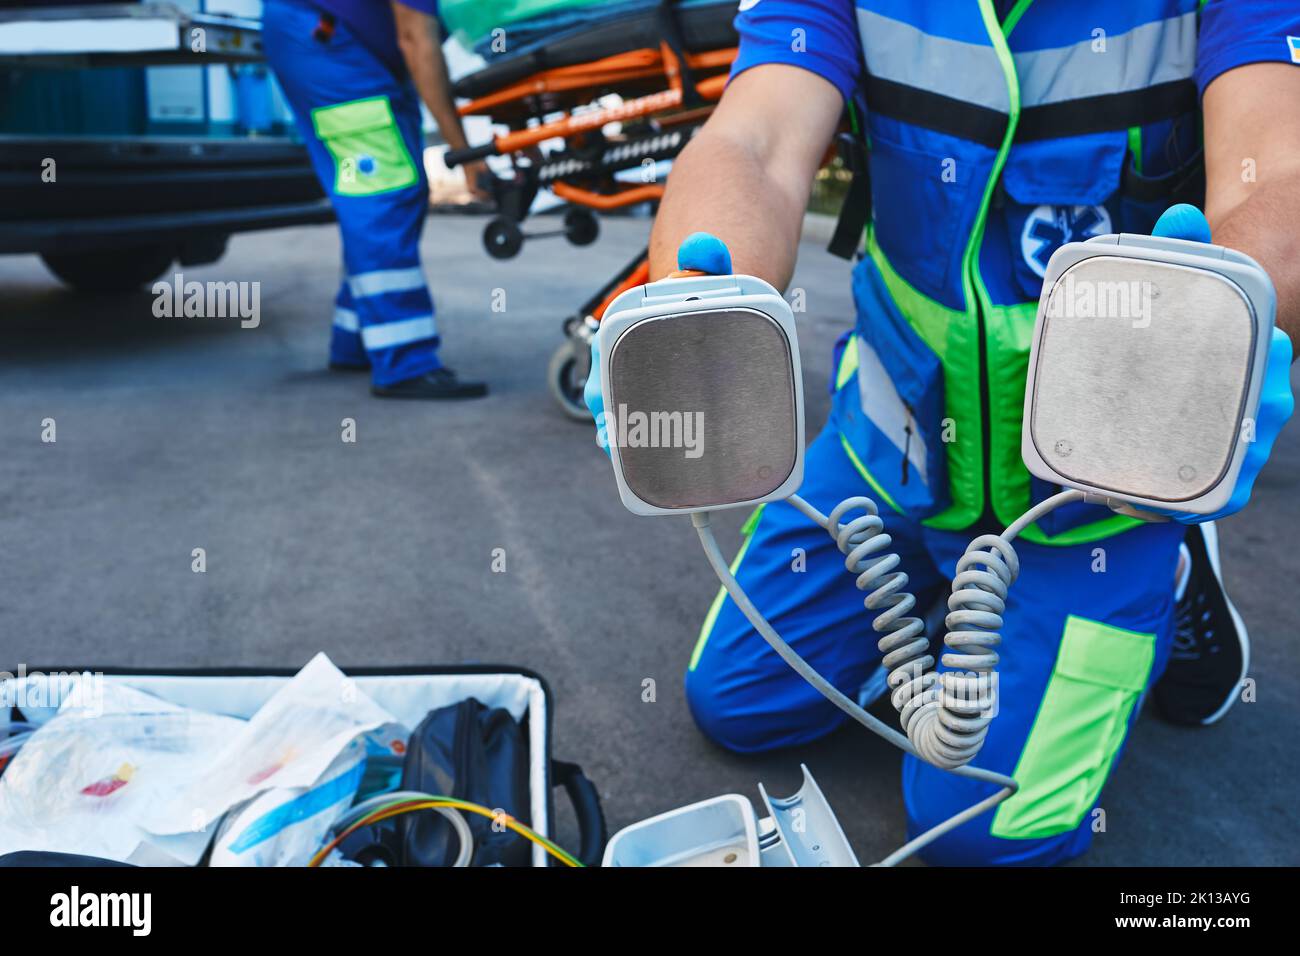 EMS paramedic holding defibrillator pads in hands during rescuing casualty and resuscitation outdoors near ambulance. Emergency medical services Stock Photo